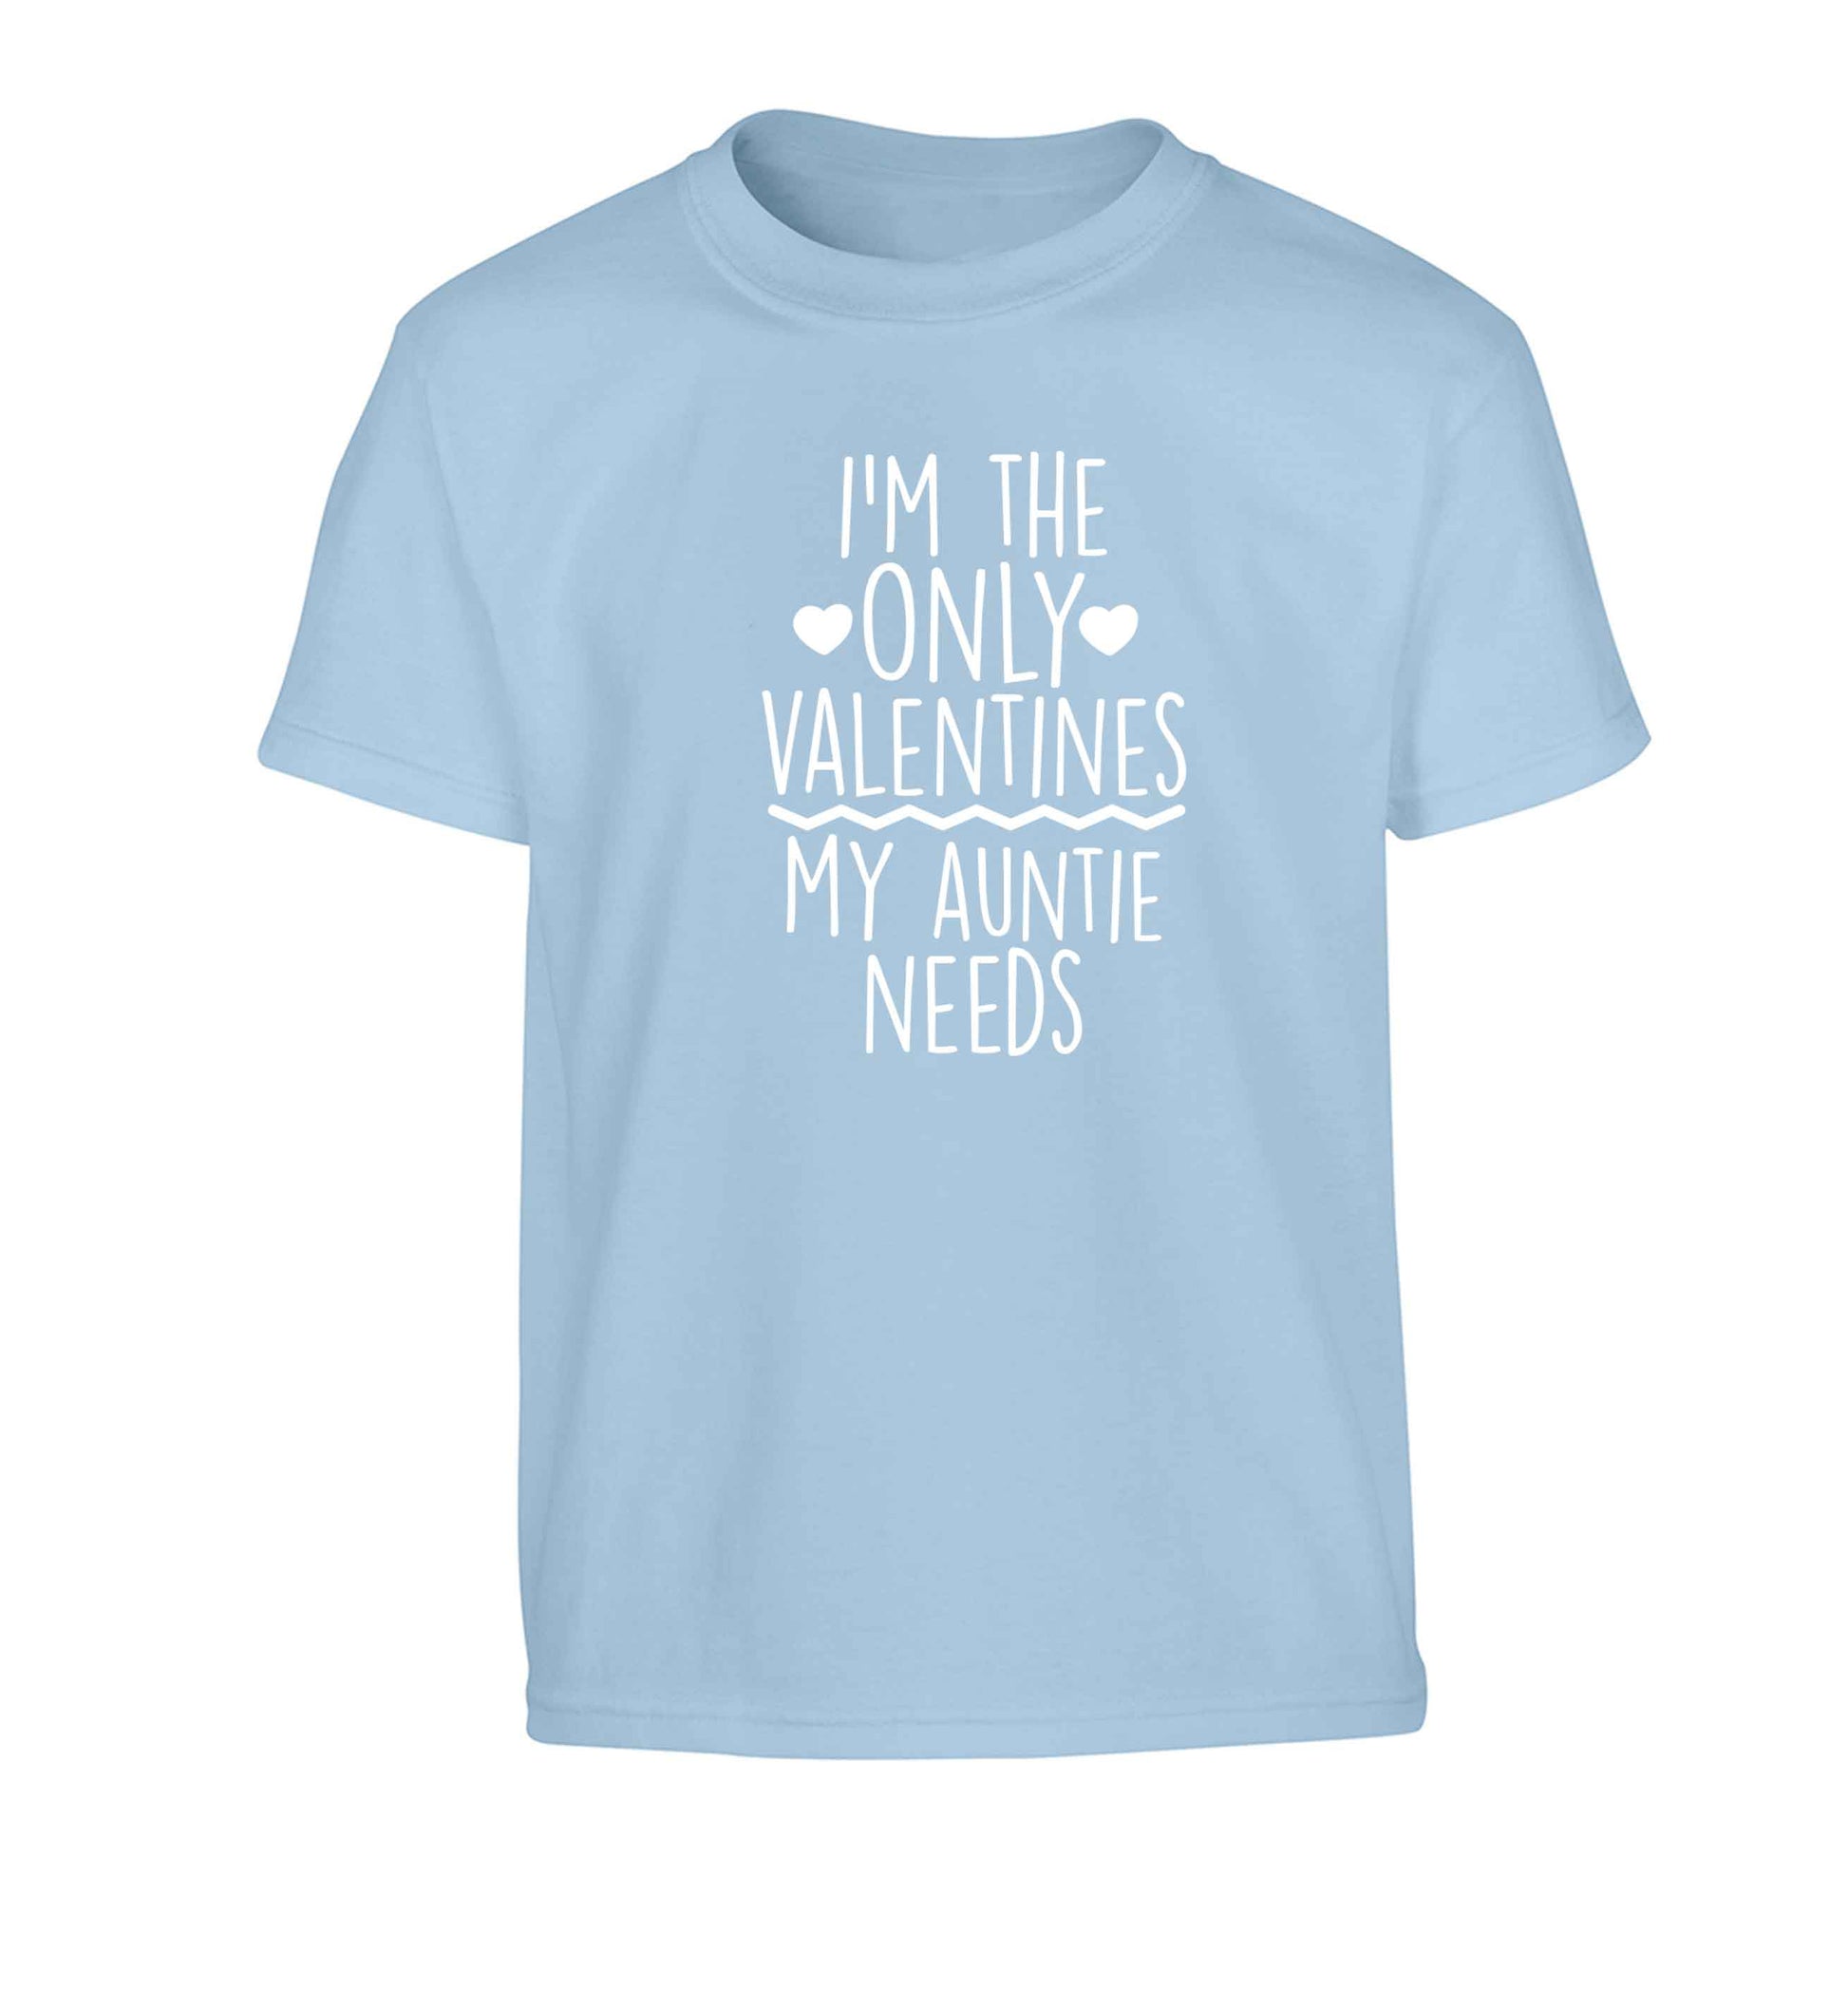 I'm the only valentines my auntie needs Children's light blue Tshirt 12-13 Years